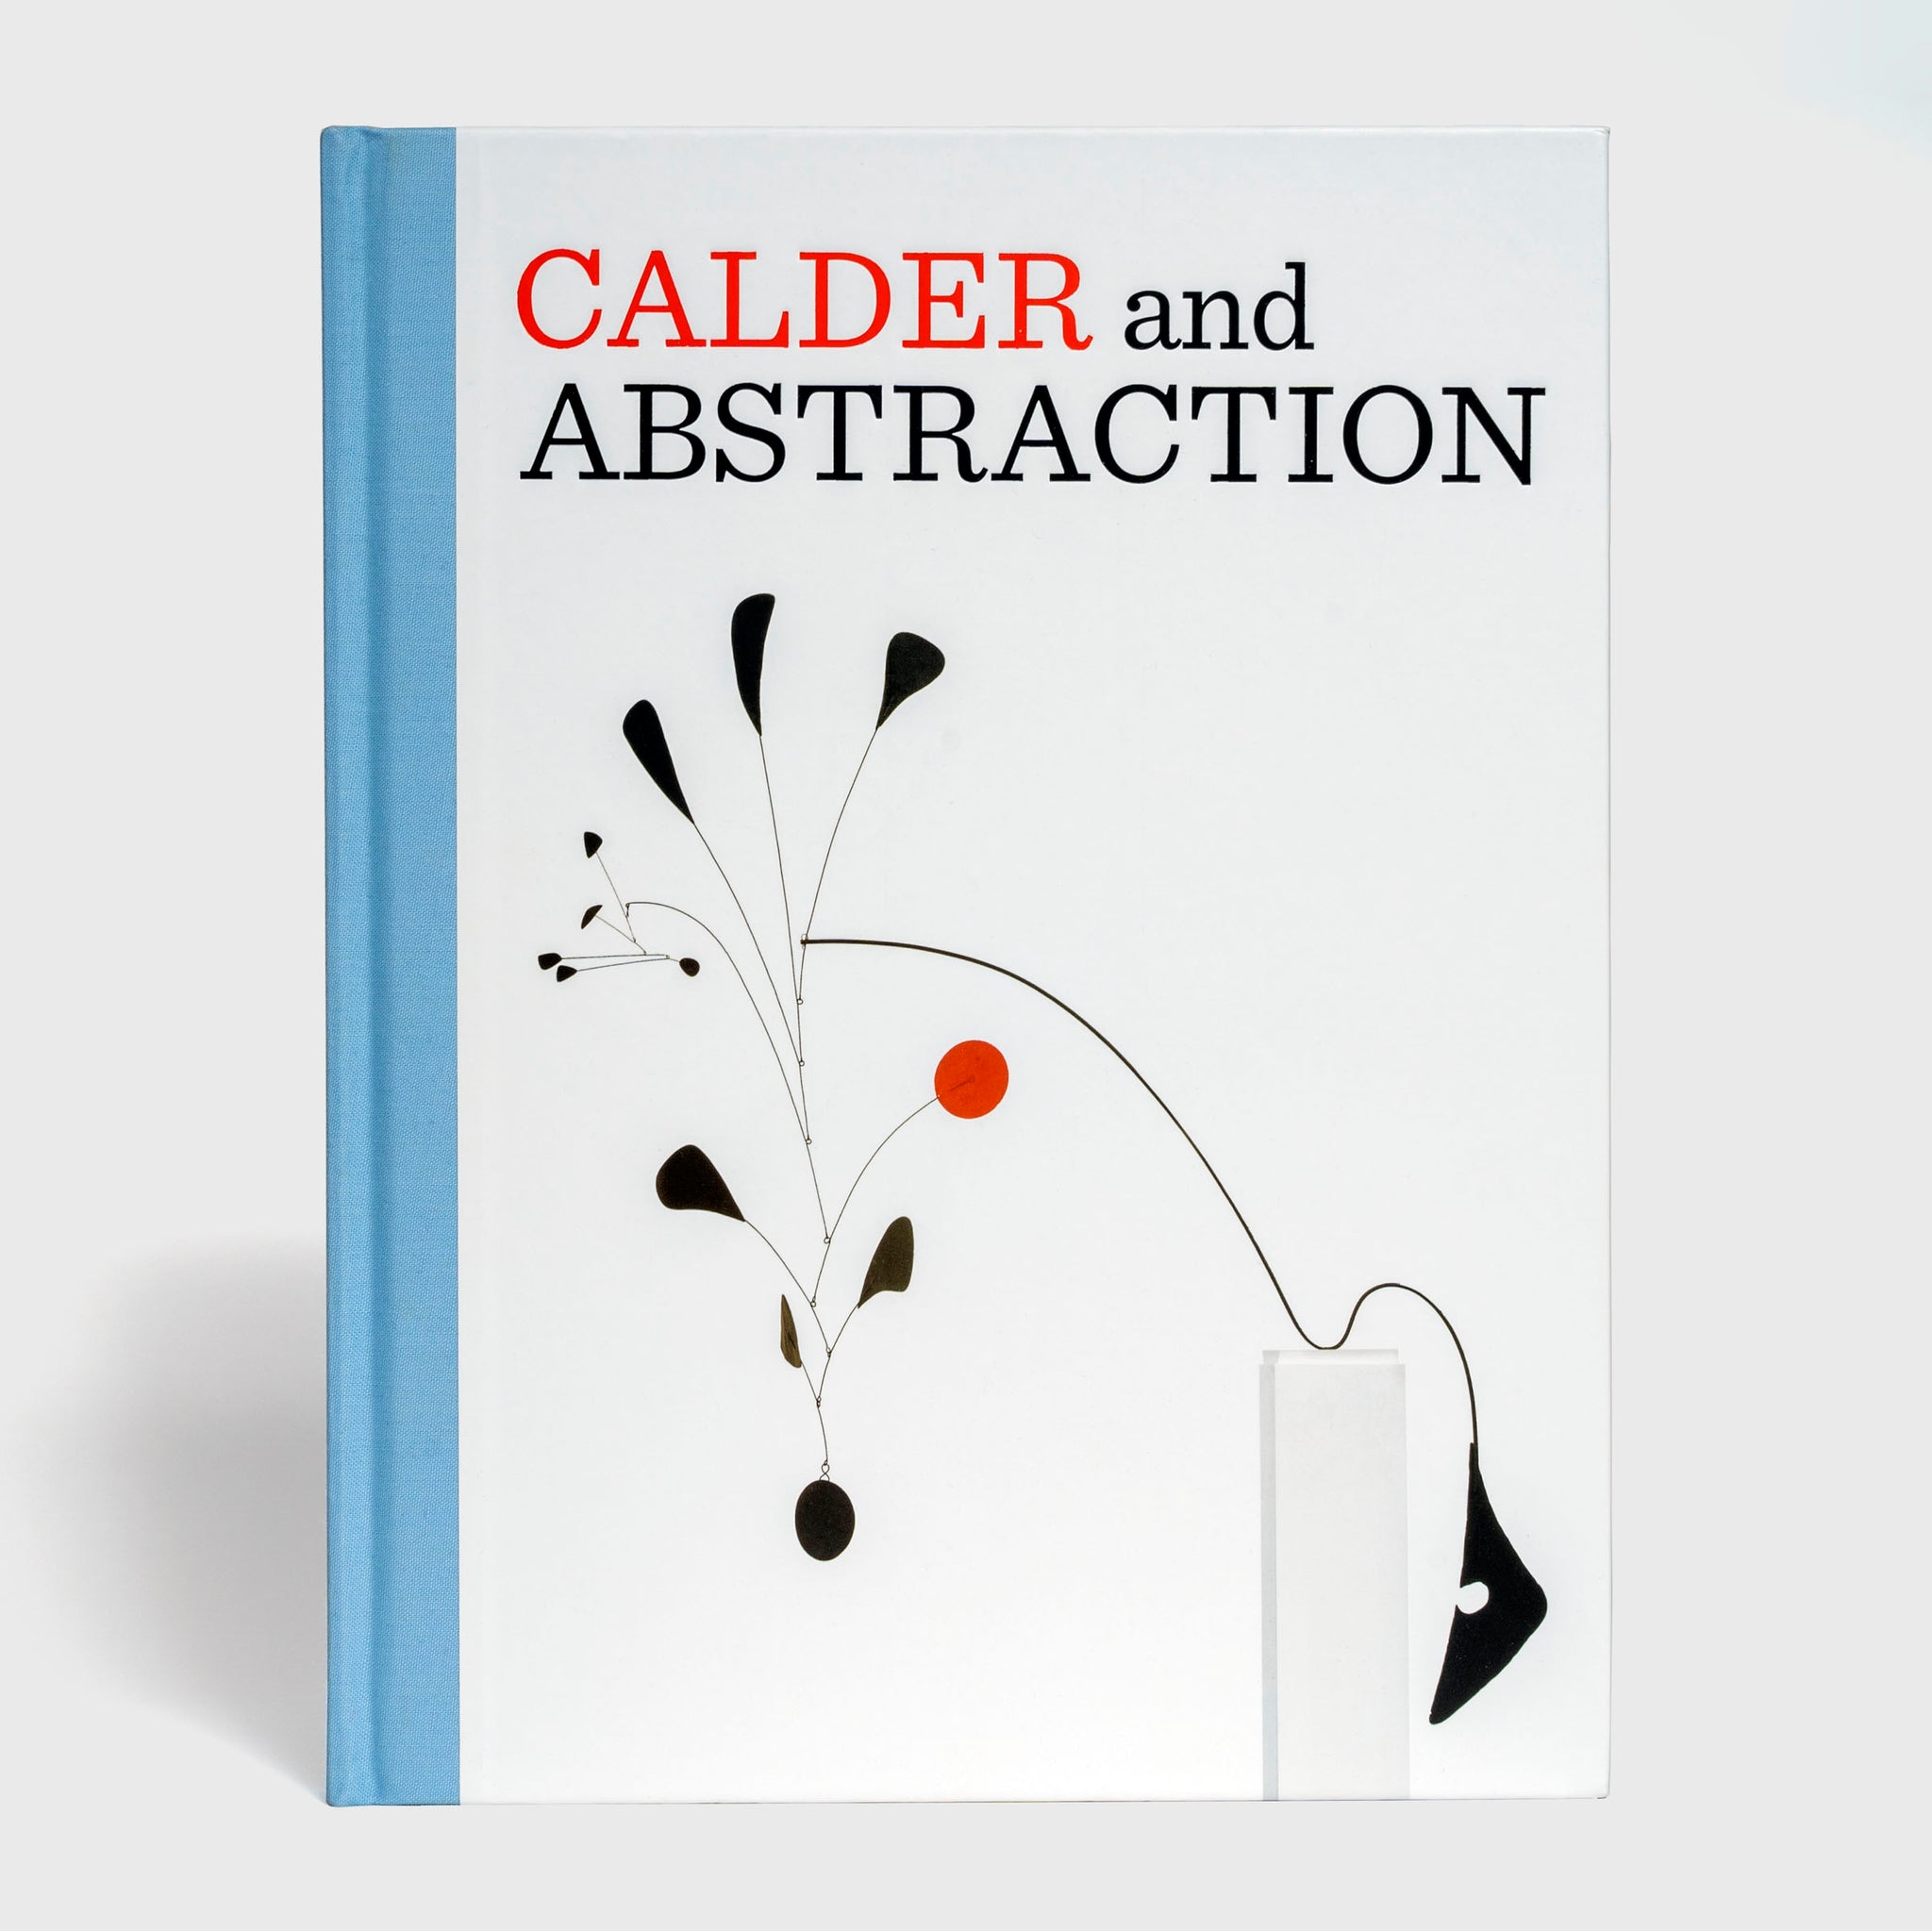 Calder and Abstraction